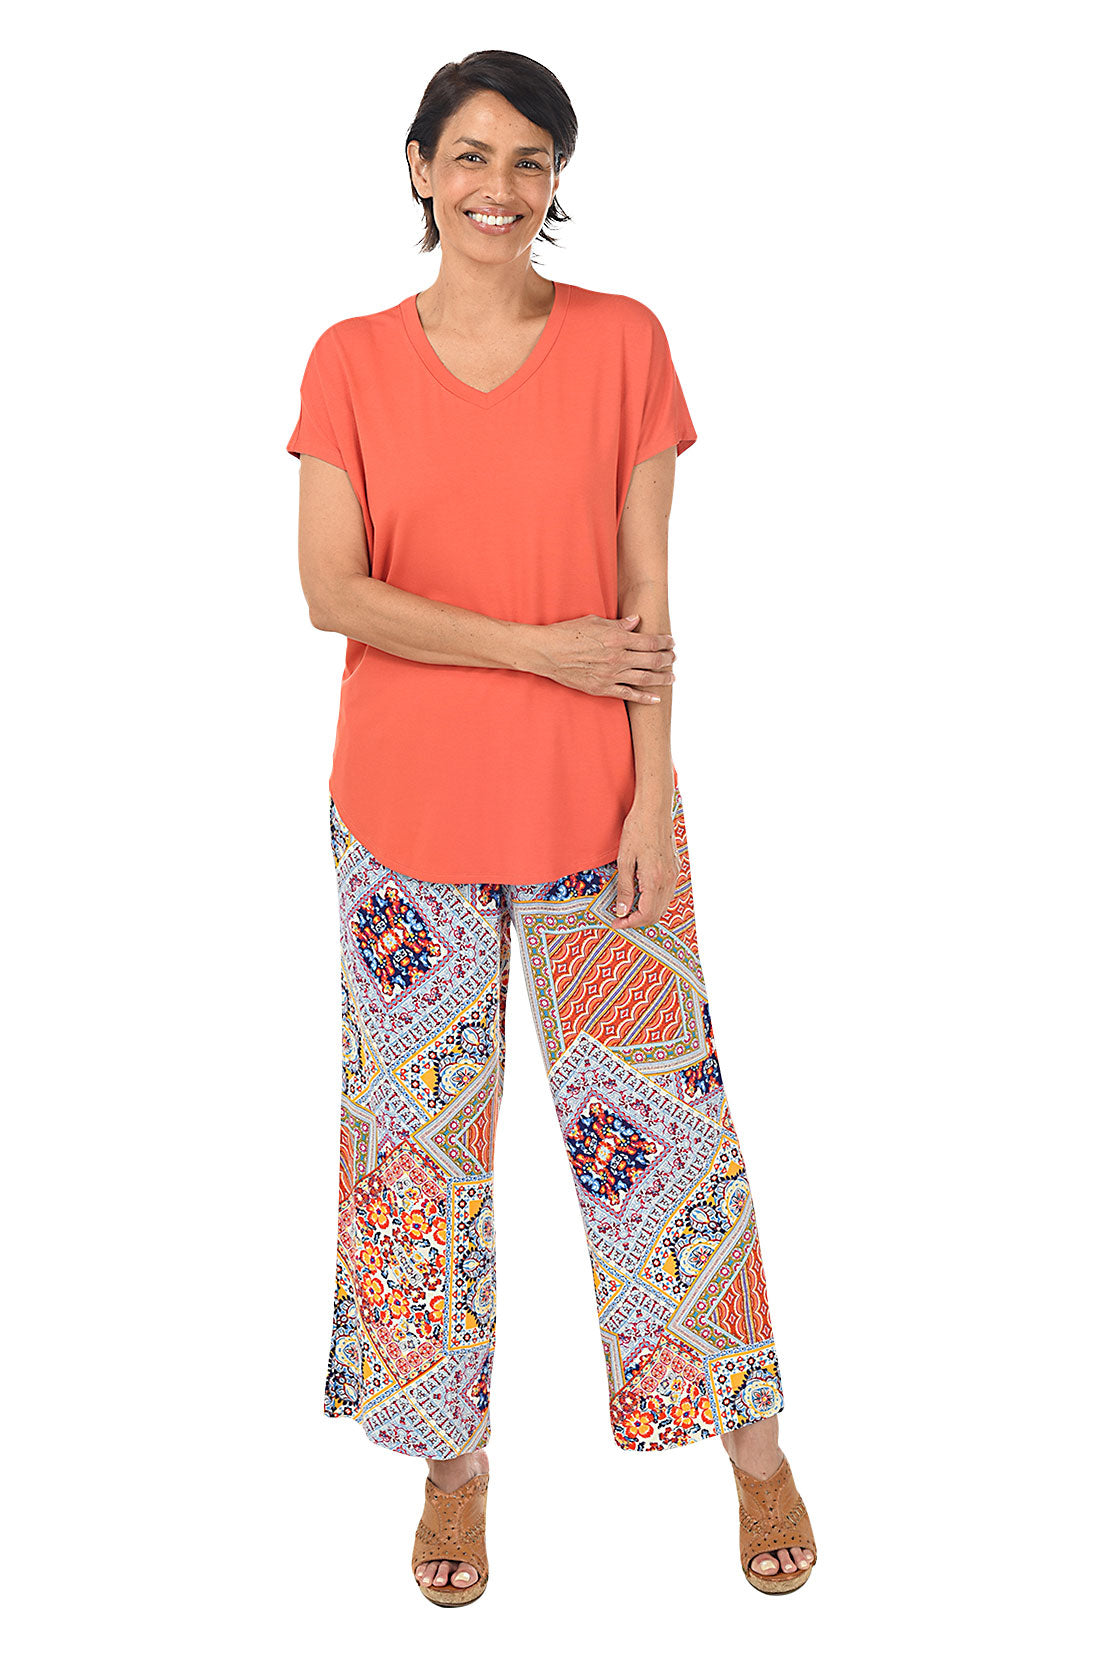 Leila Patchwork Pull-On Palazzo Pant